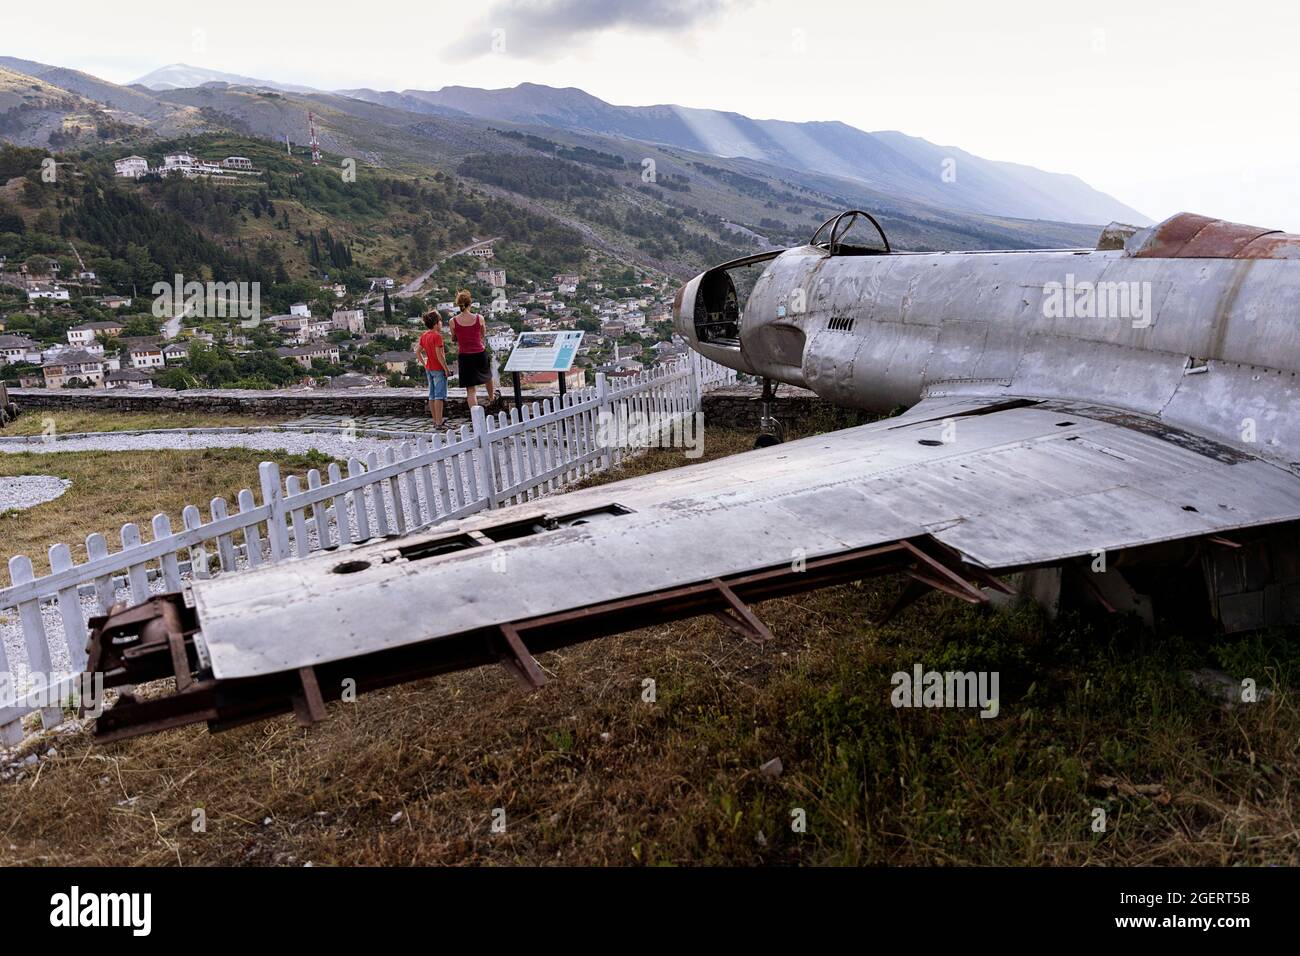 Mother and son standing by American military plane at the castle of Gjirokaster, Albania Stock Photo